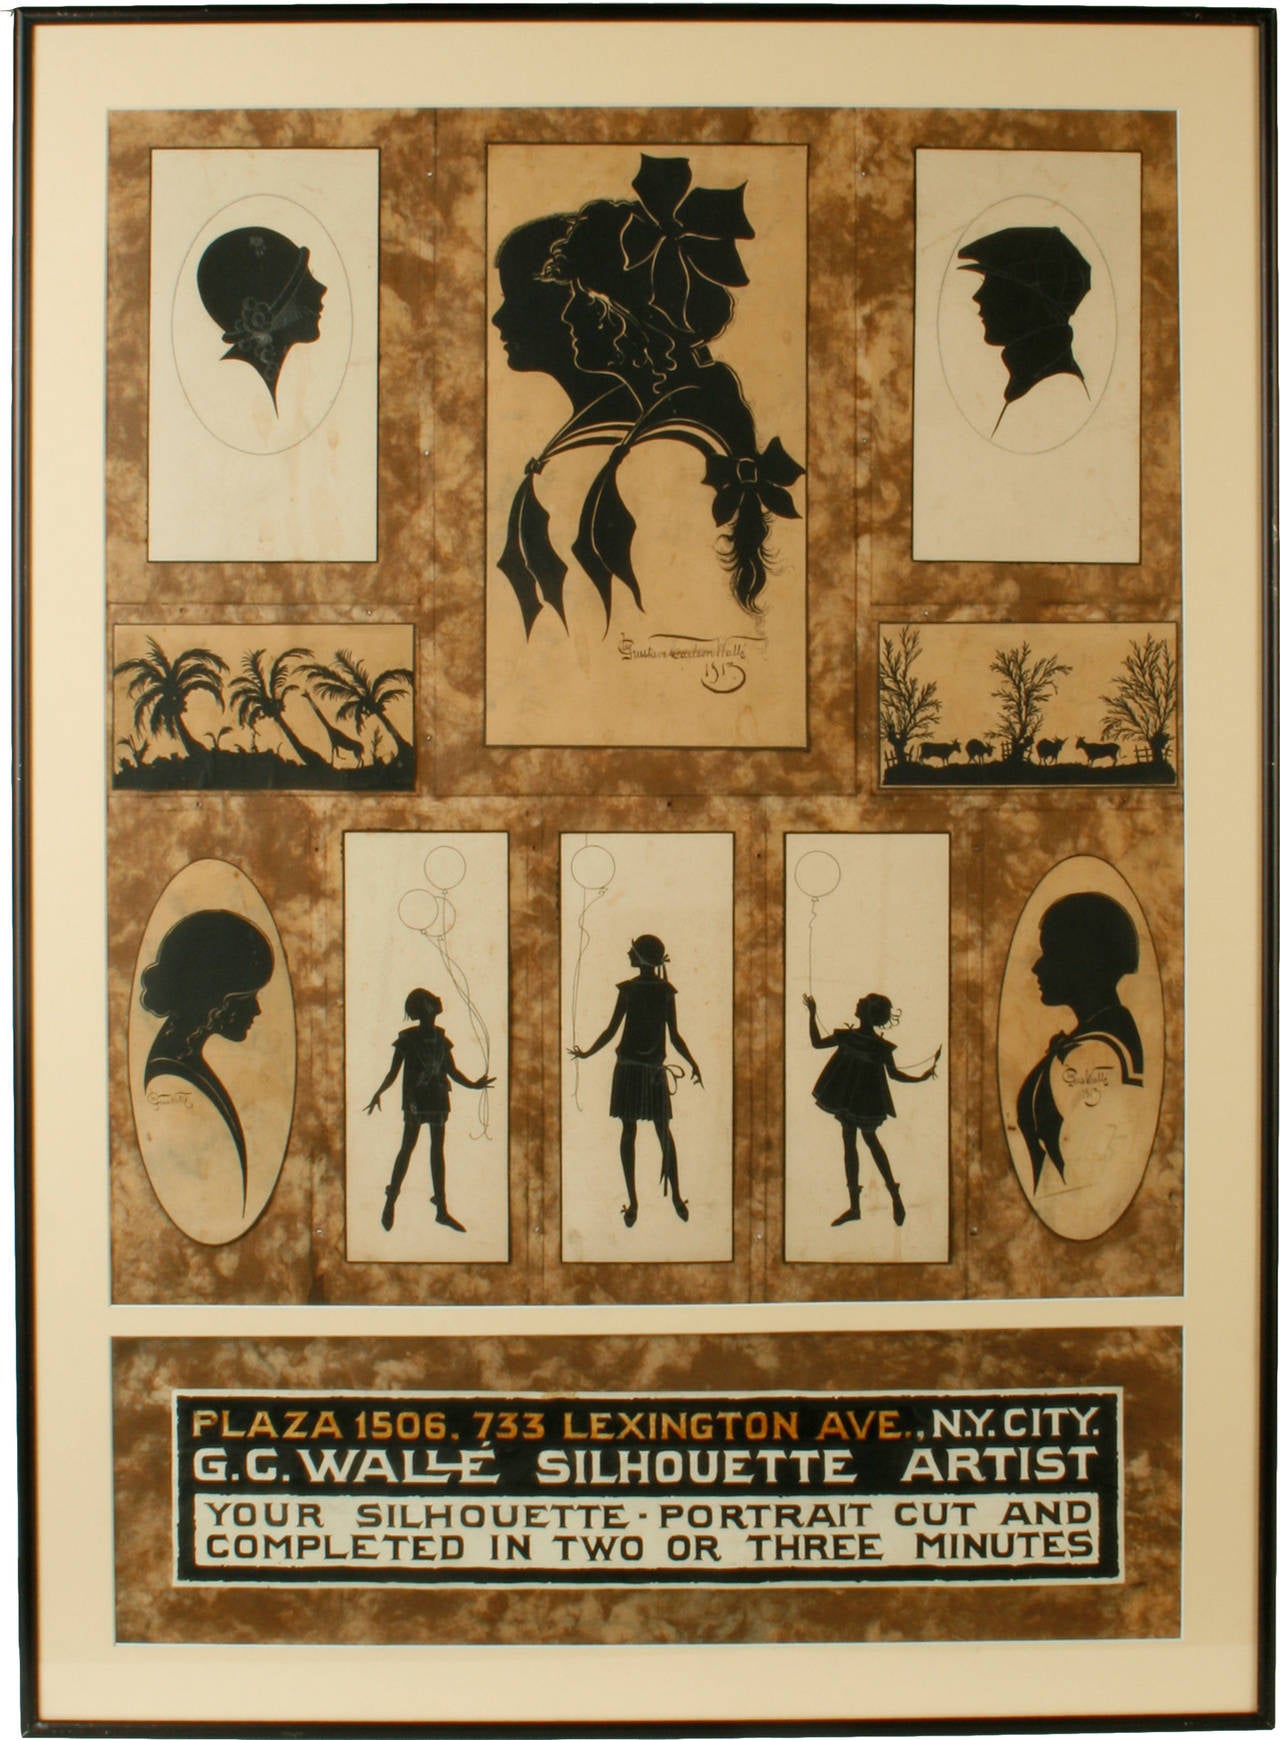 These three remarkable posters are a collage of hand-cut Silhouette portraits and dioramas done by Swedish artist Gustave C. Walle. They are signed and dated 1913. They advertise his Lexington Avenue location in New York and his work done on the